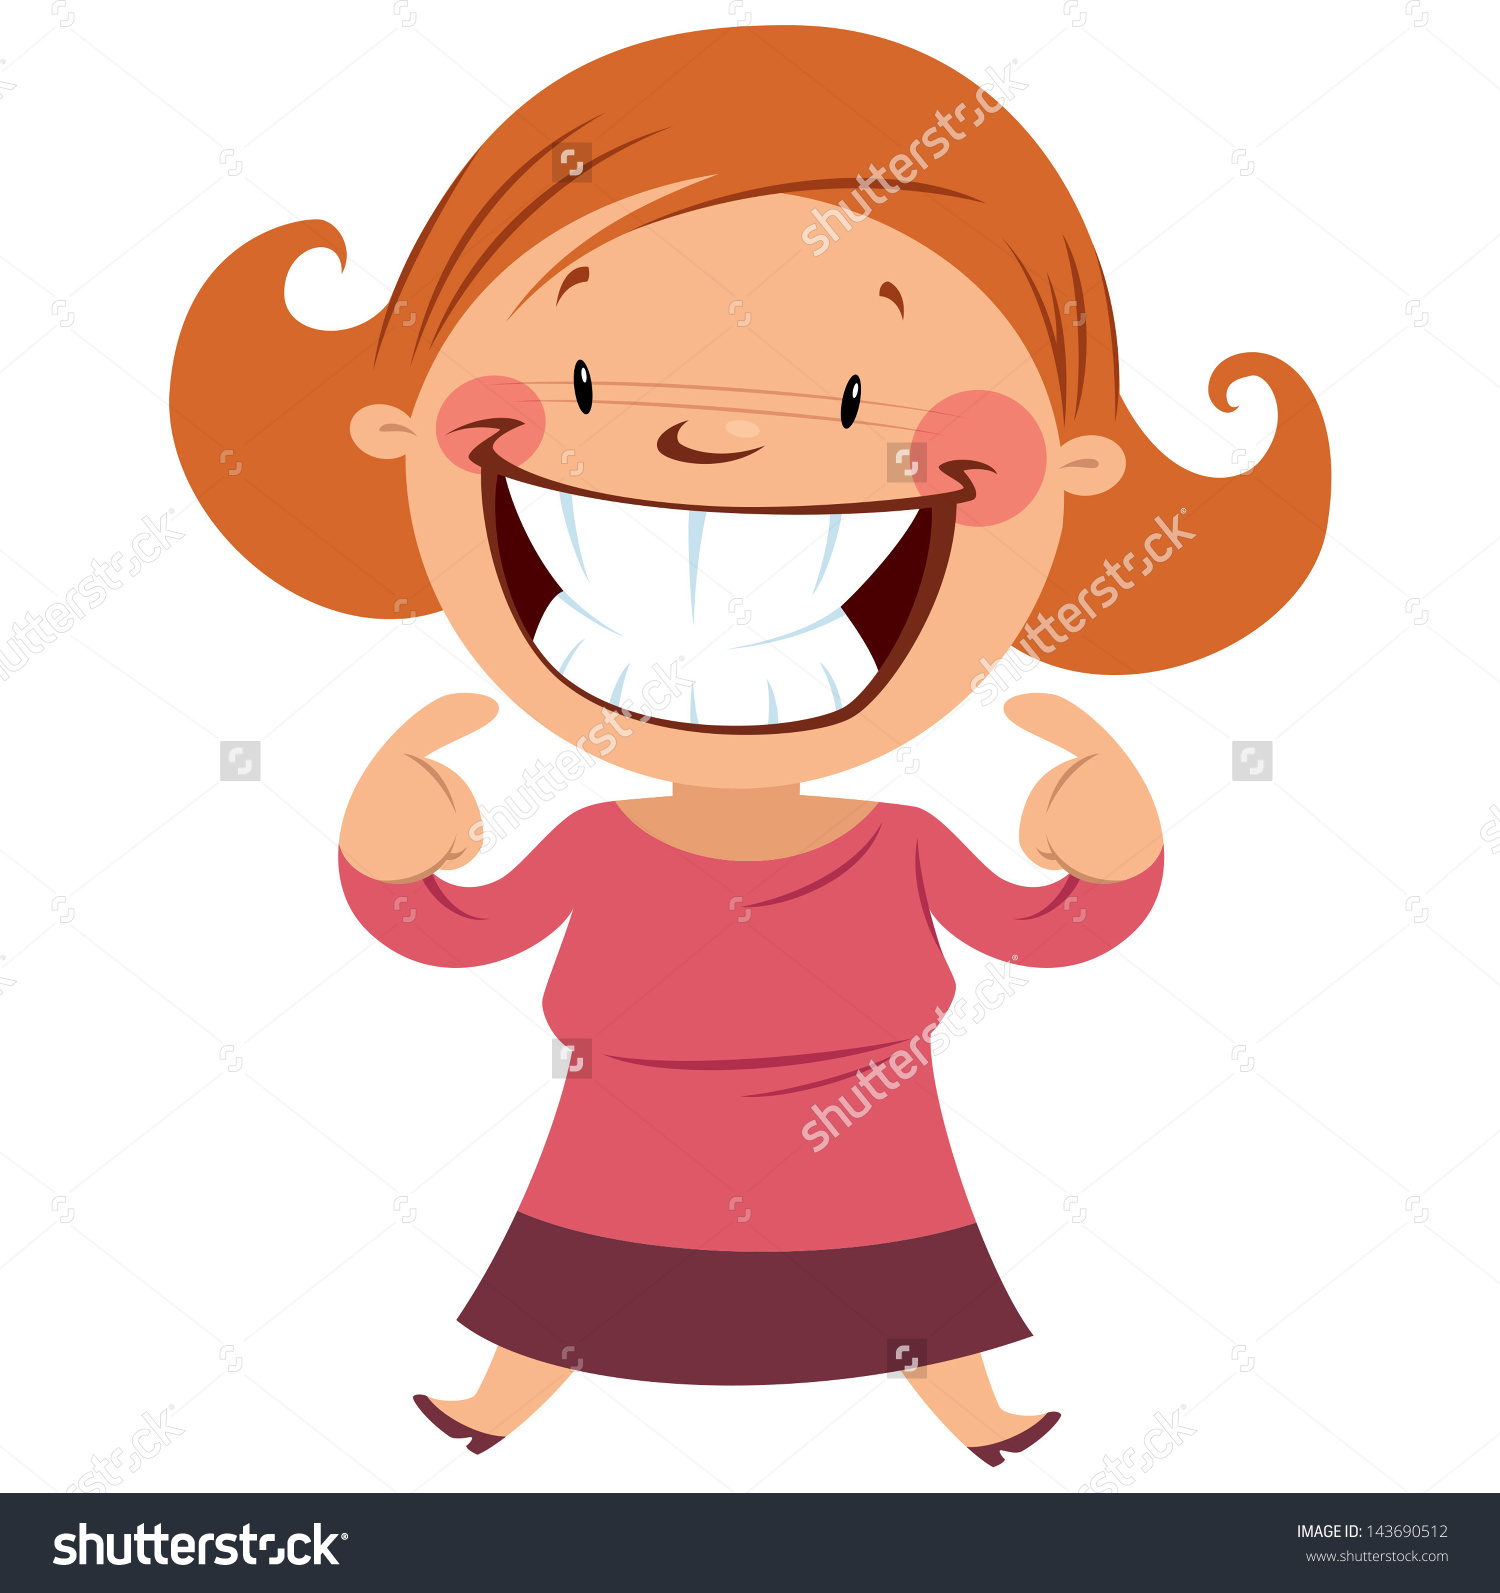 Happy woman smiling and making a gesture pointing her smile and teeth